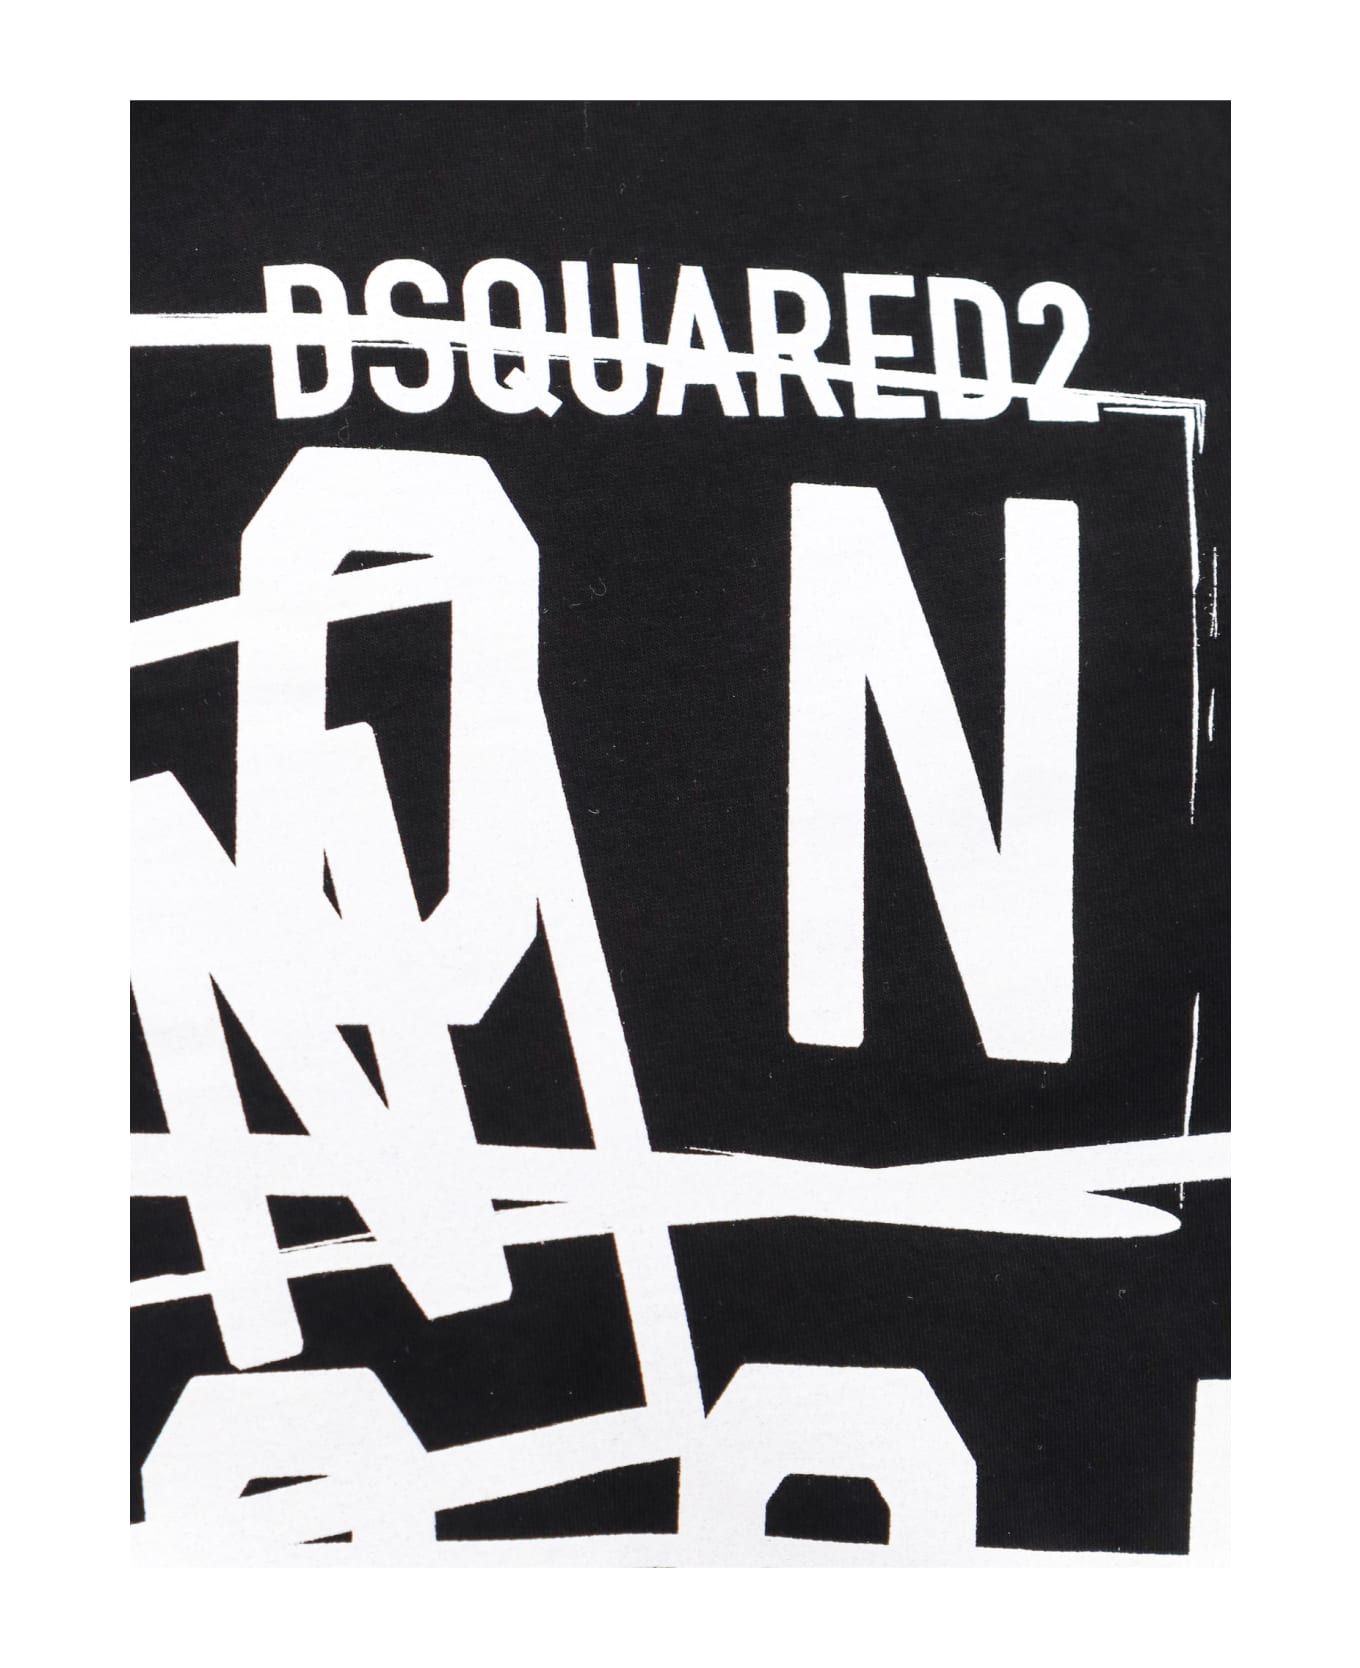 Dsquared2 Icon Stamps Cool Fit Tee - Black